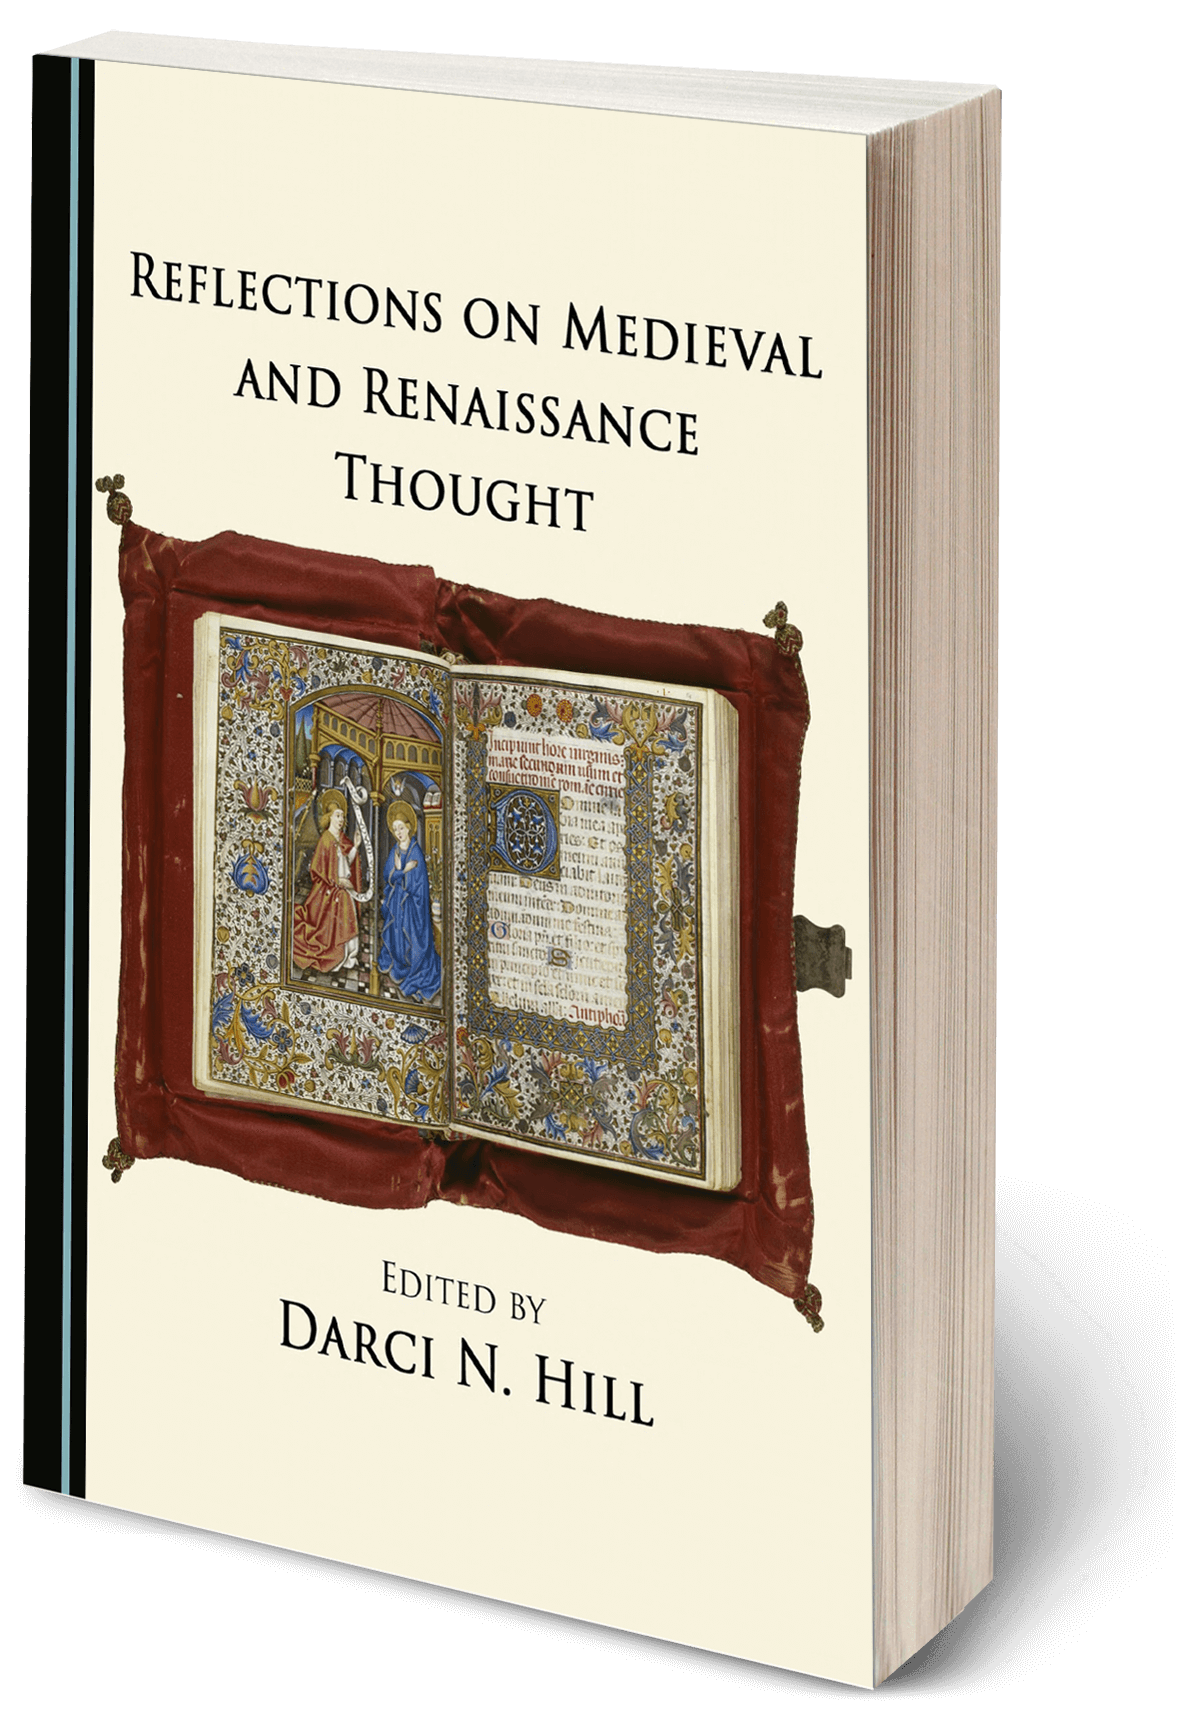 Reflections on Medieval and Renaissance Thought